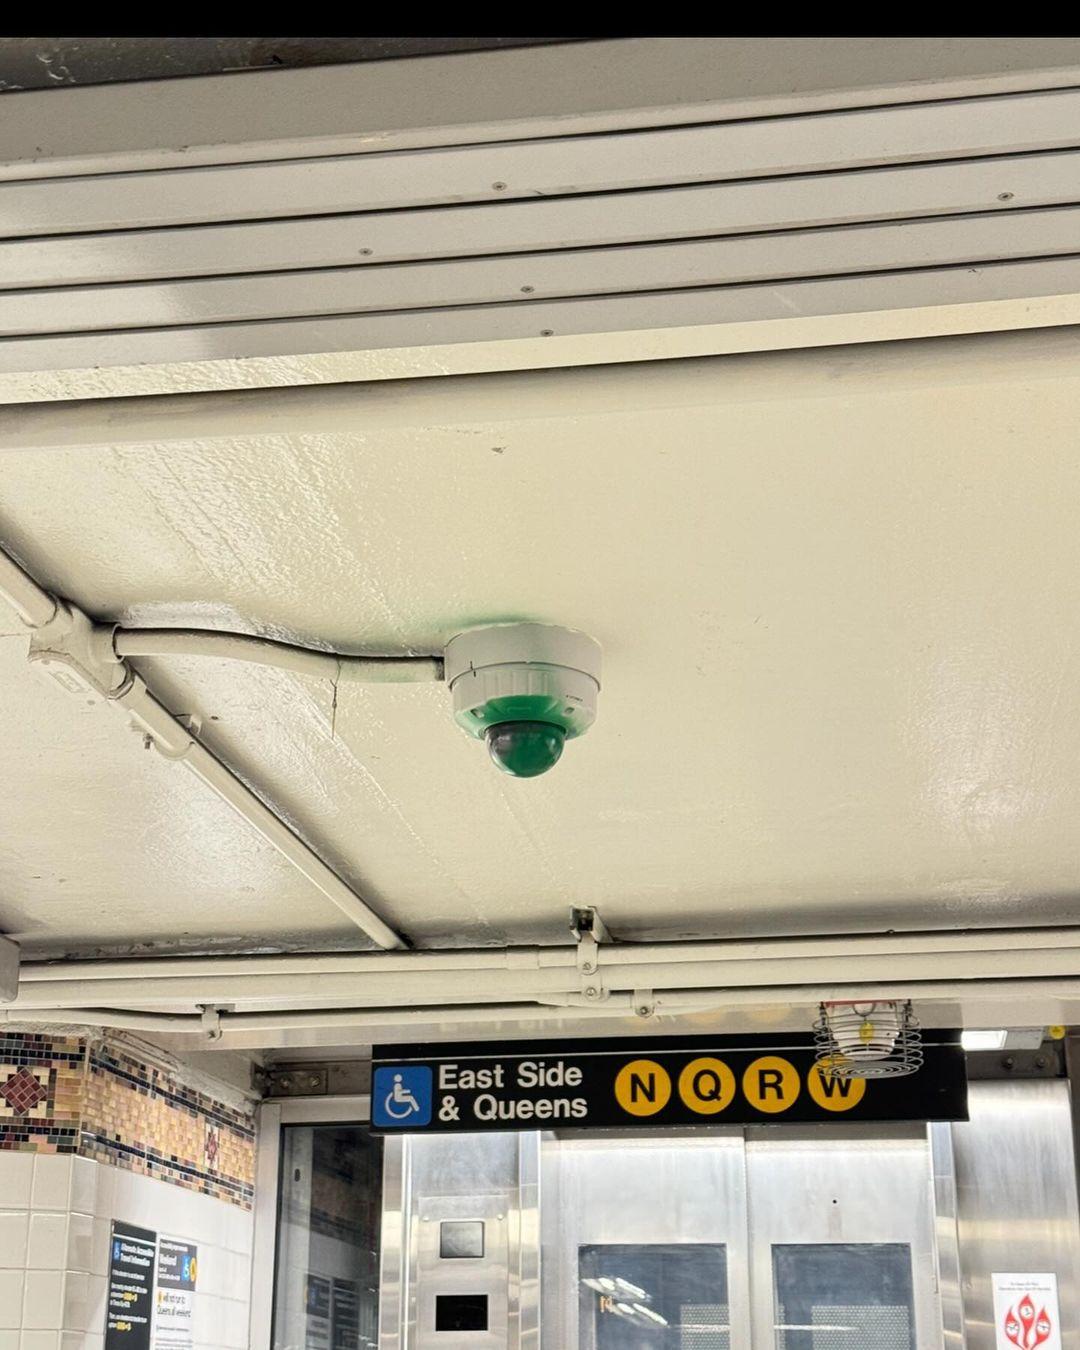 Dome camera on the ceiling of an N/Q/R/W station, covered in green paint